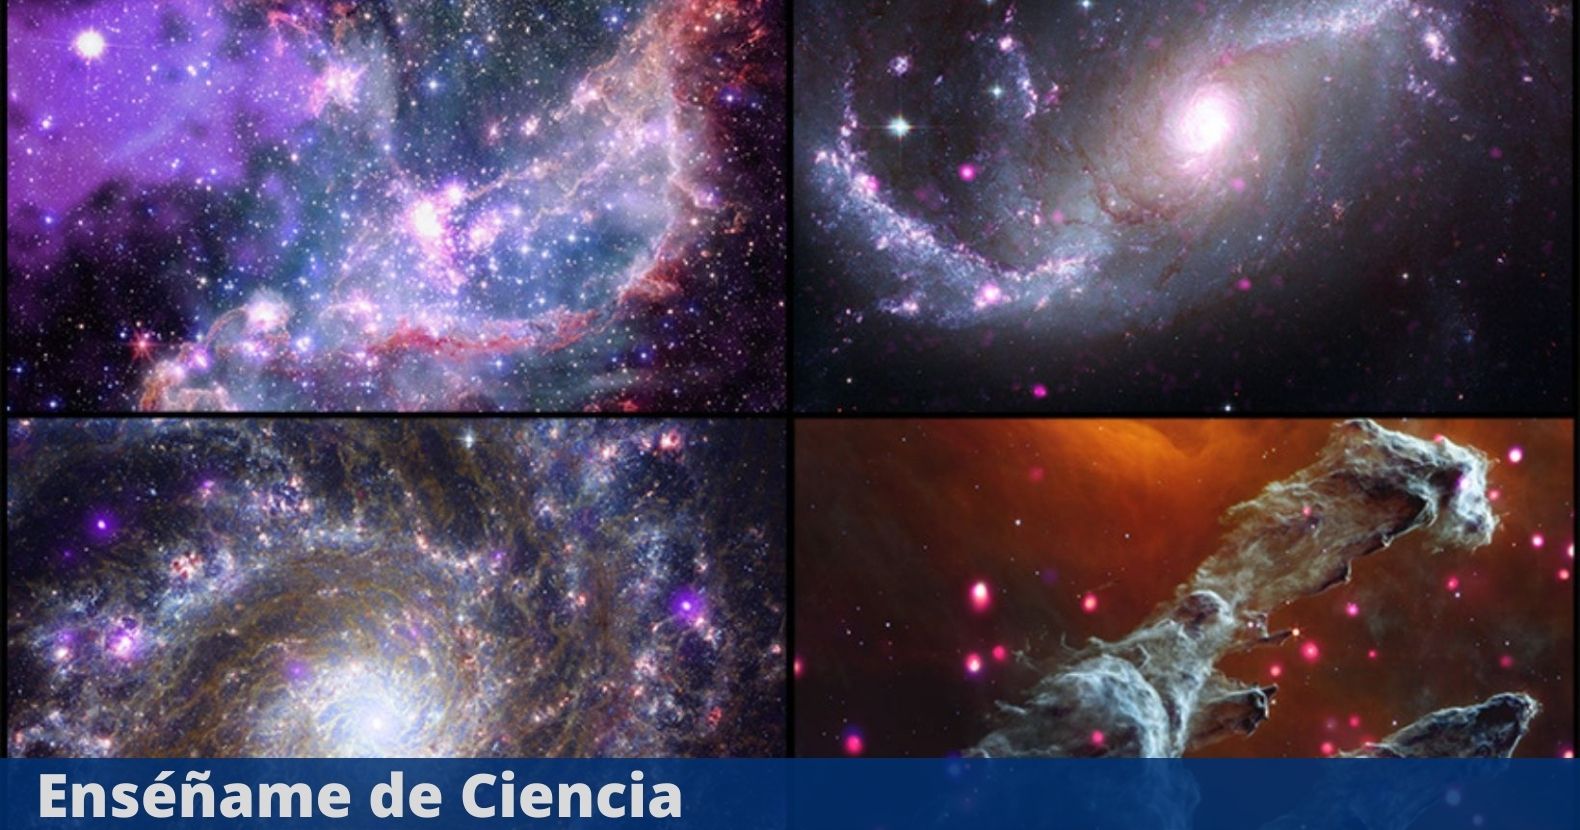 James Webb, in conjunction with other telescopes, reveals 4 stunning new images of the universe – Enseñame de Ciencia